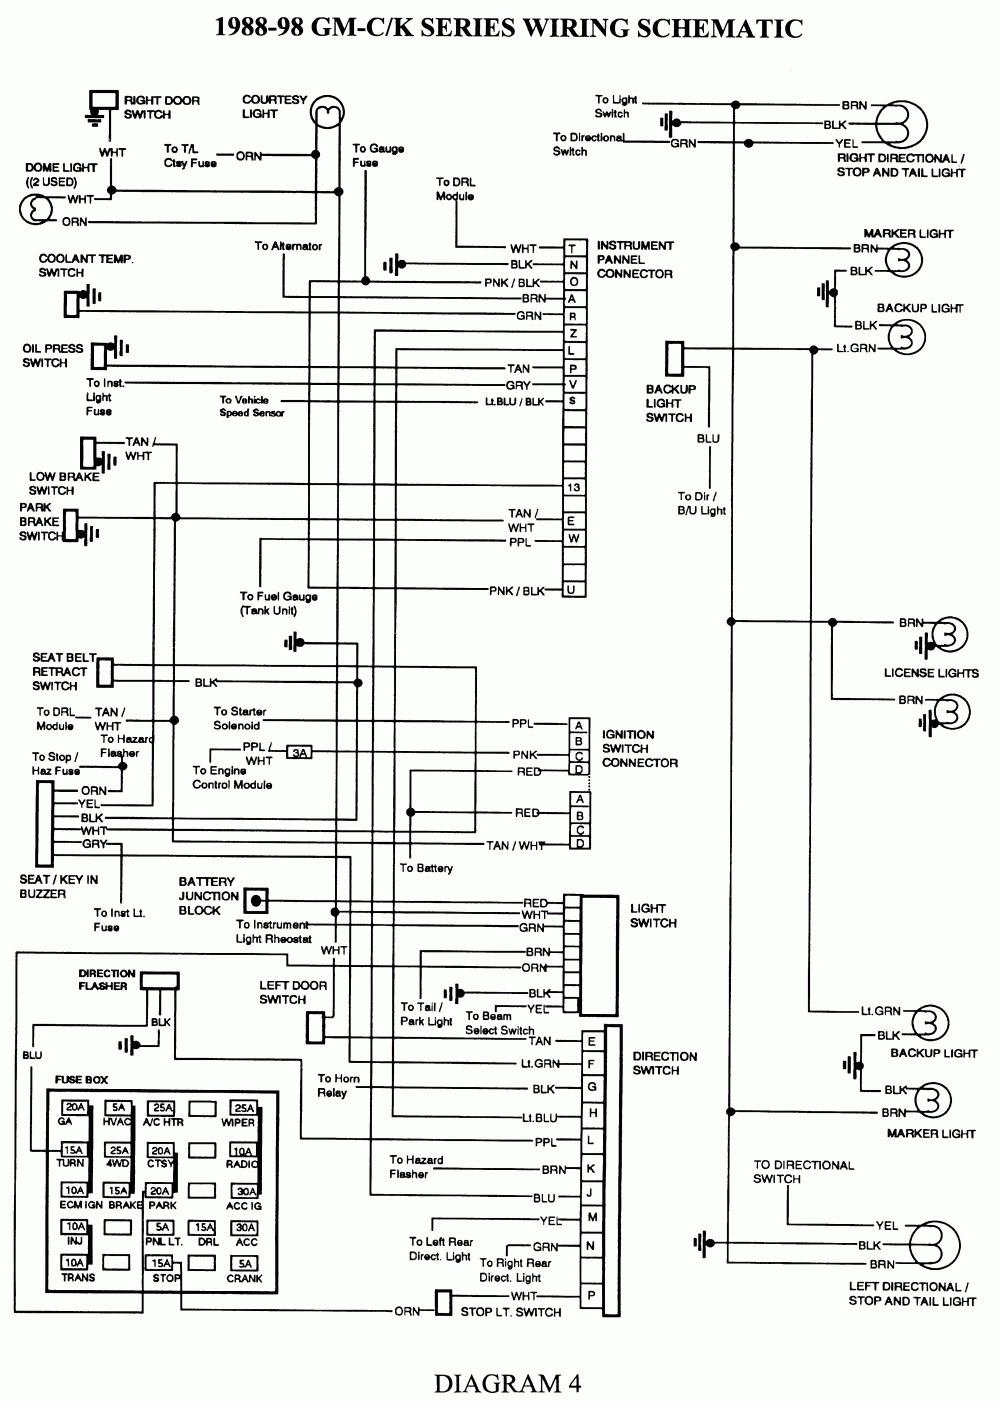 How Do You Rewire Tail Lights From Scratch On A 1988 Chevy C1500 - 2005 Chevy Silverado Tail Light Wiring Diagram